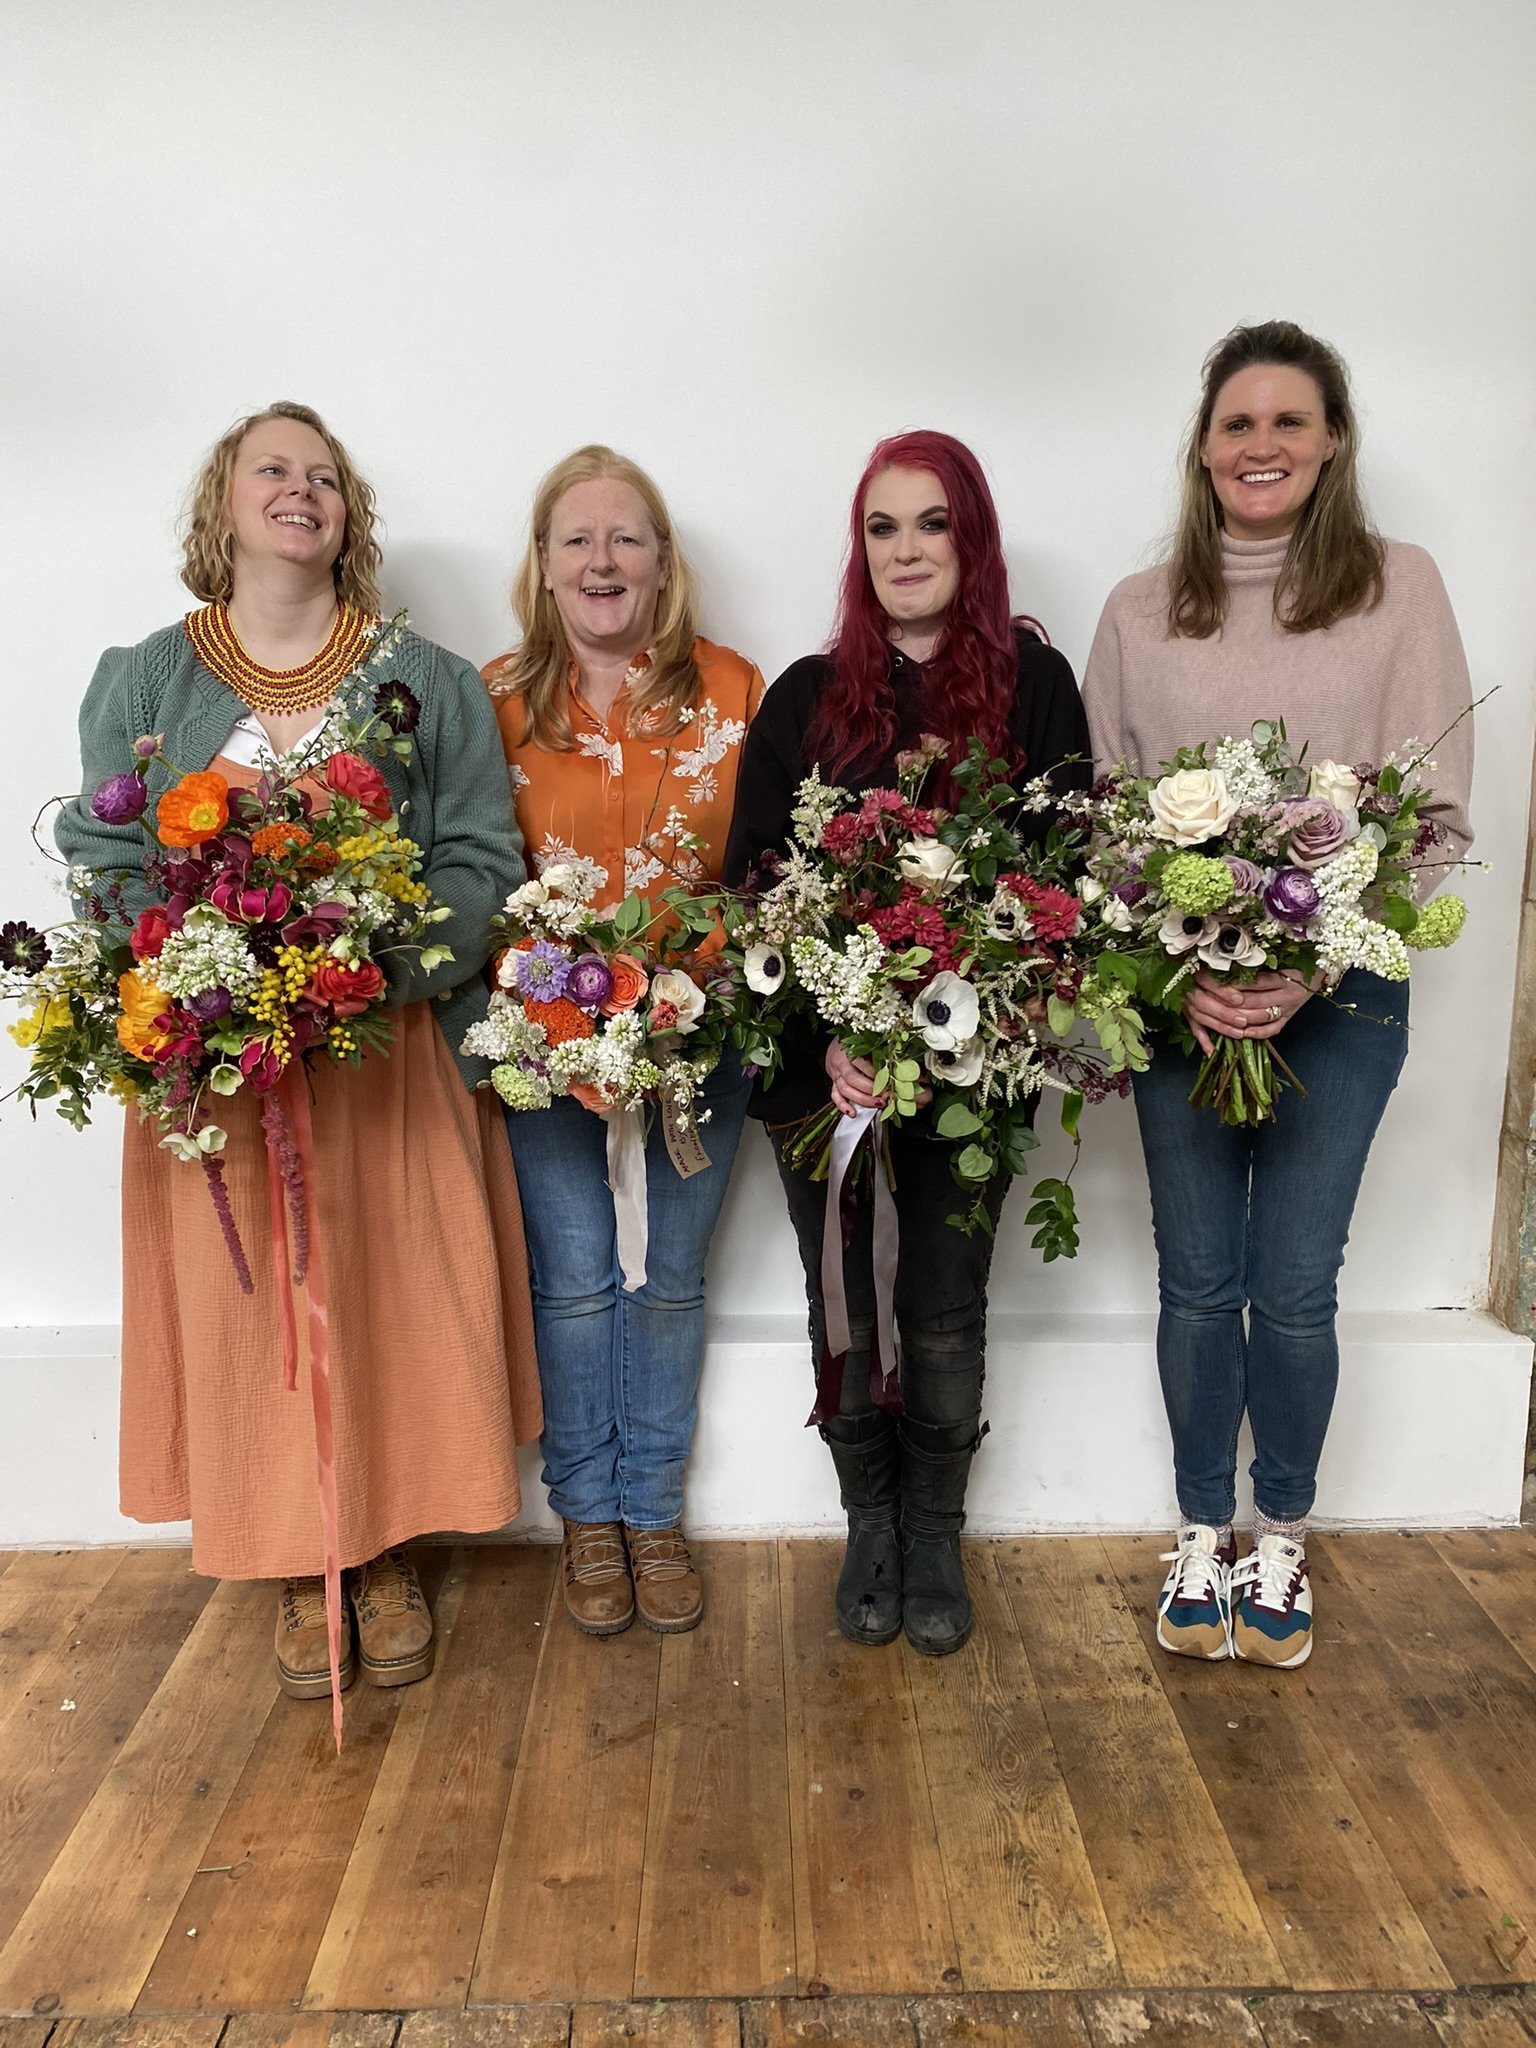 Hands-on learning: The Bath Flower School students perfecting seasonal bridal bouquets